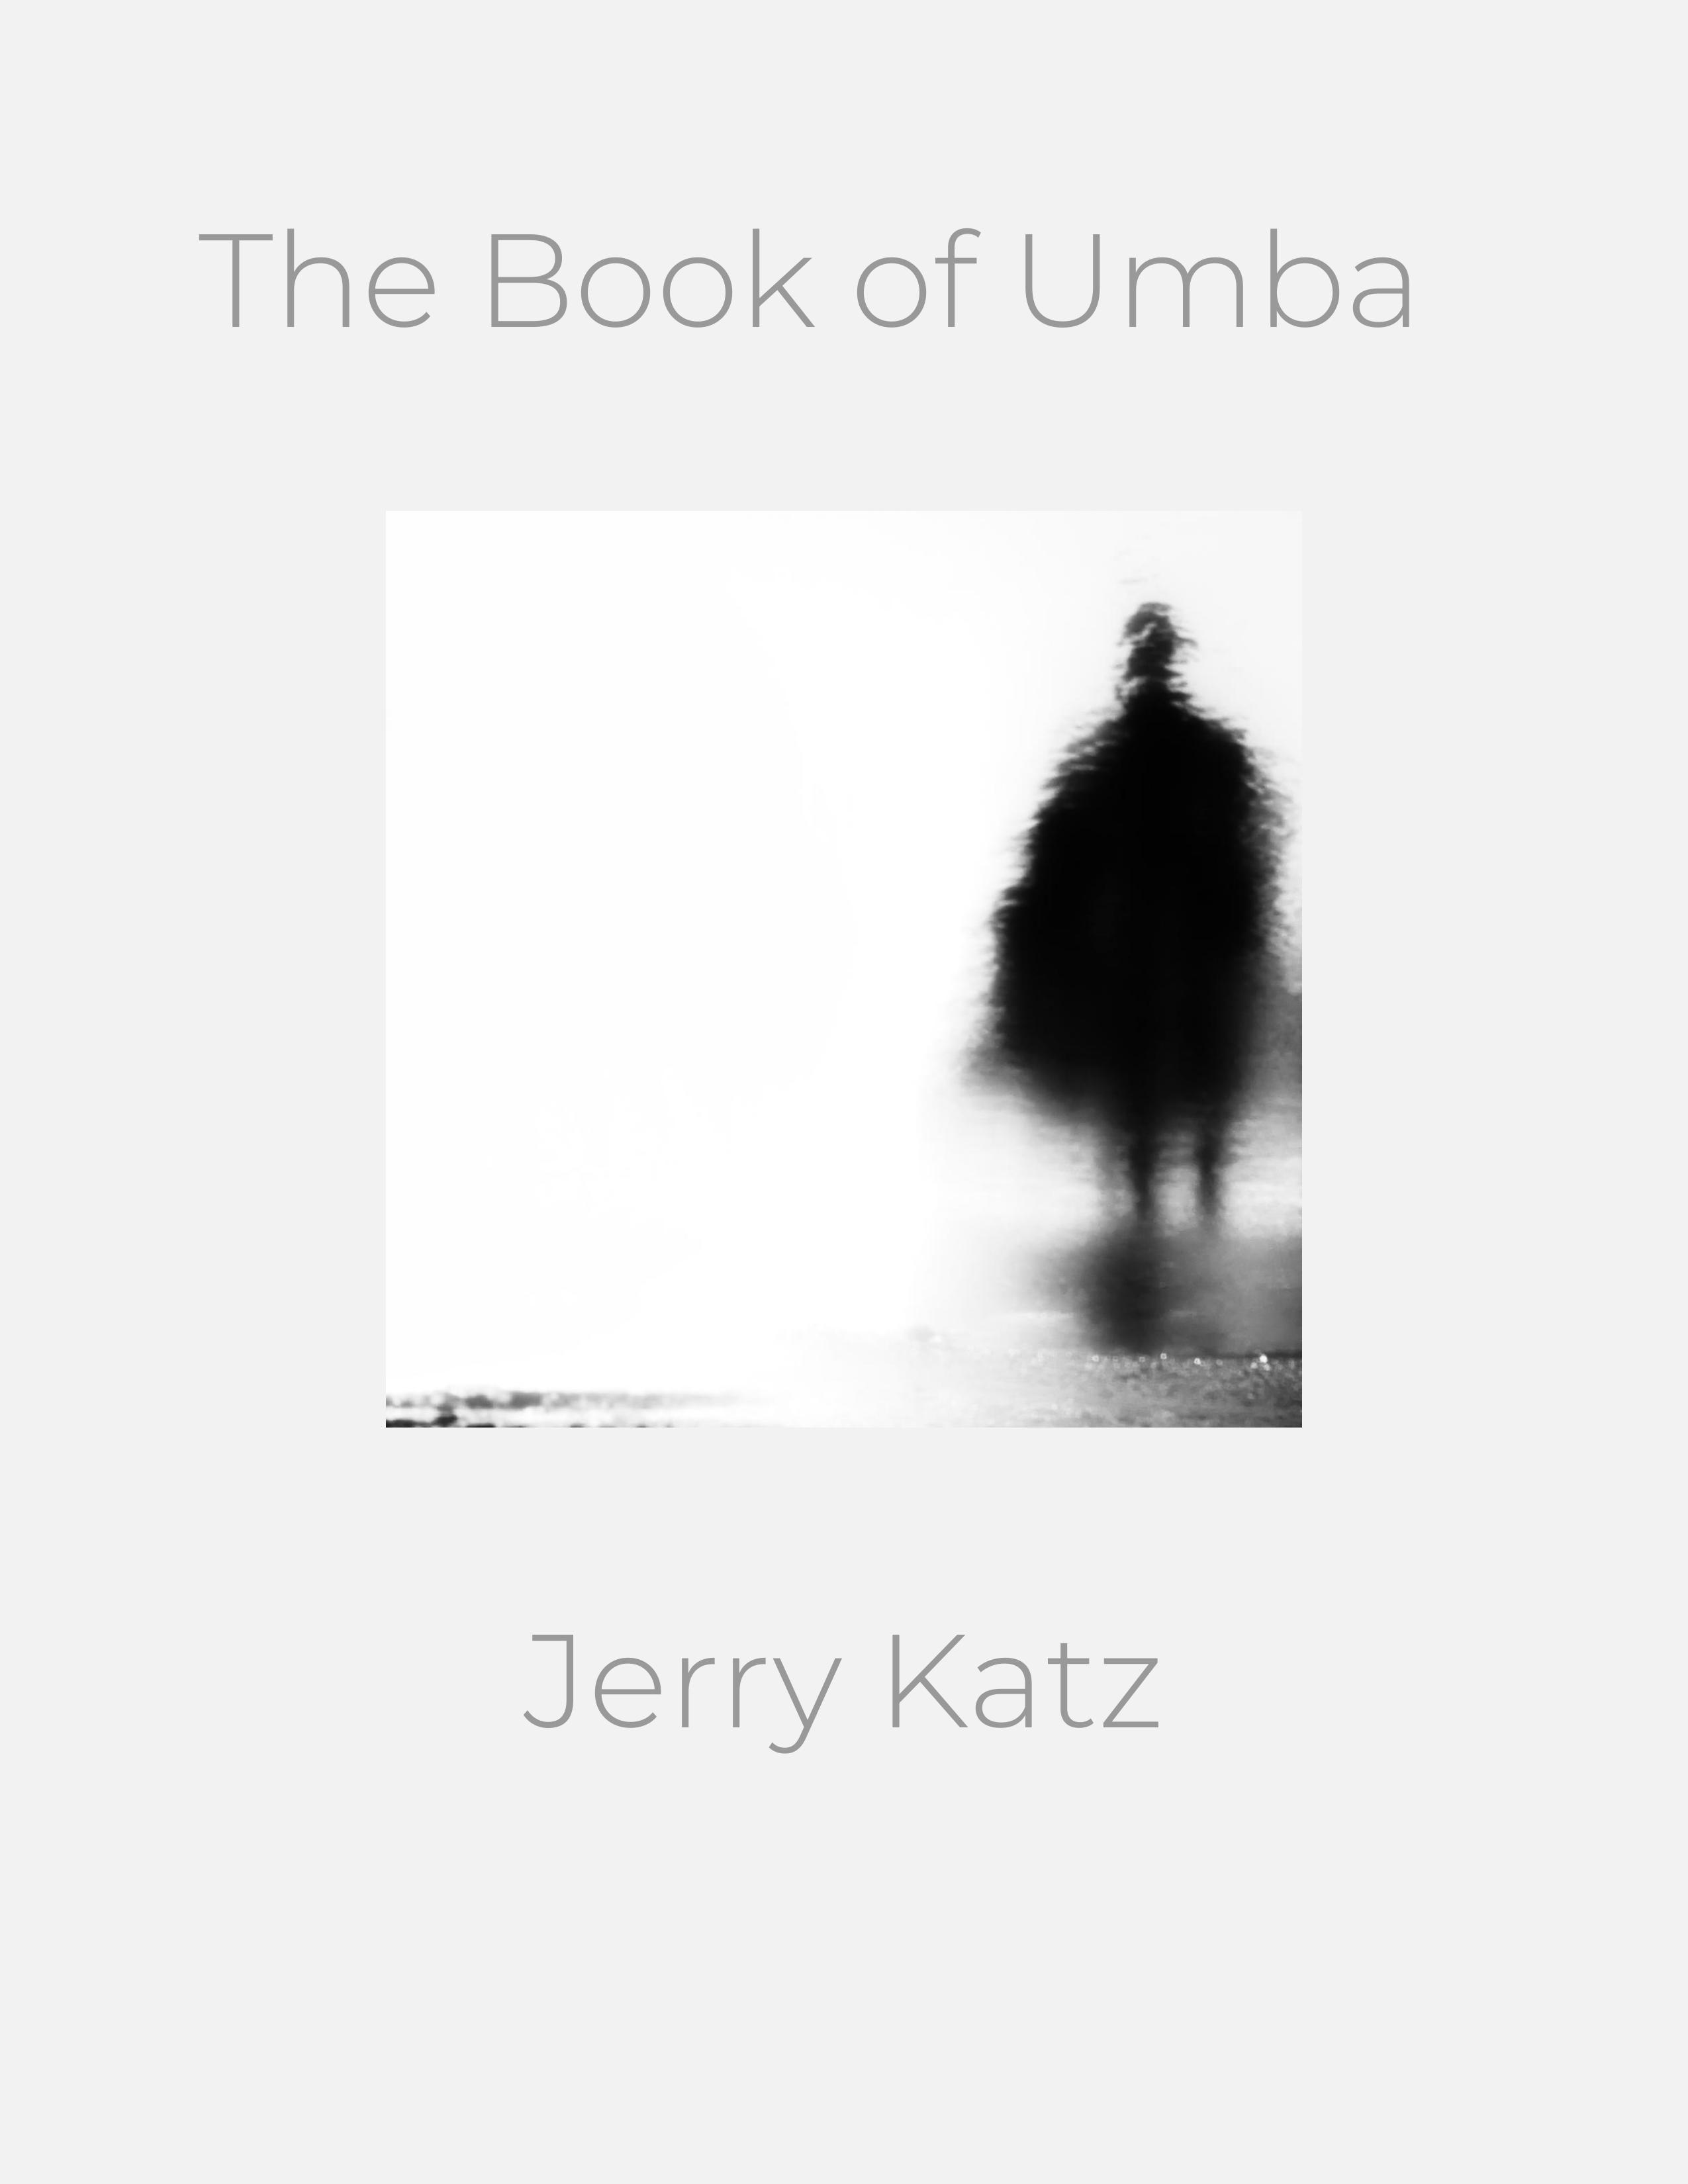 cover of the book of umba